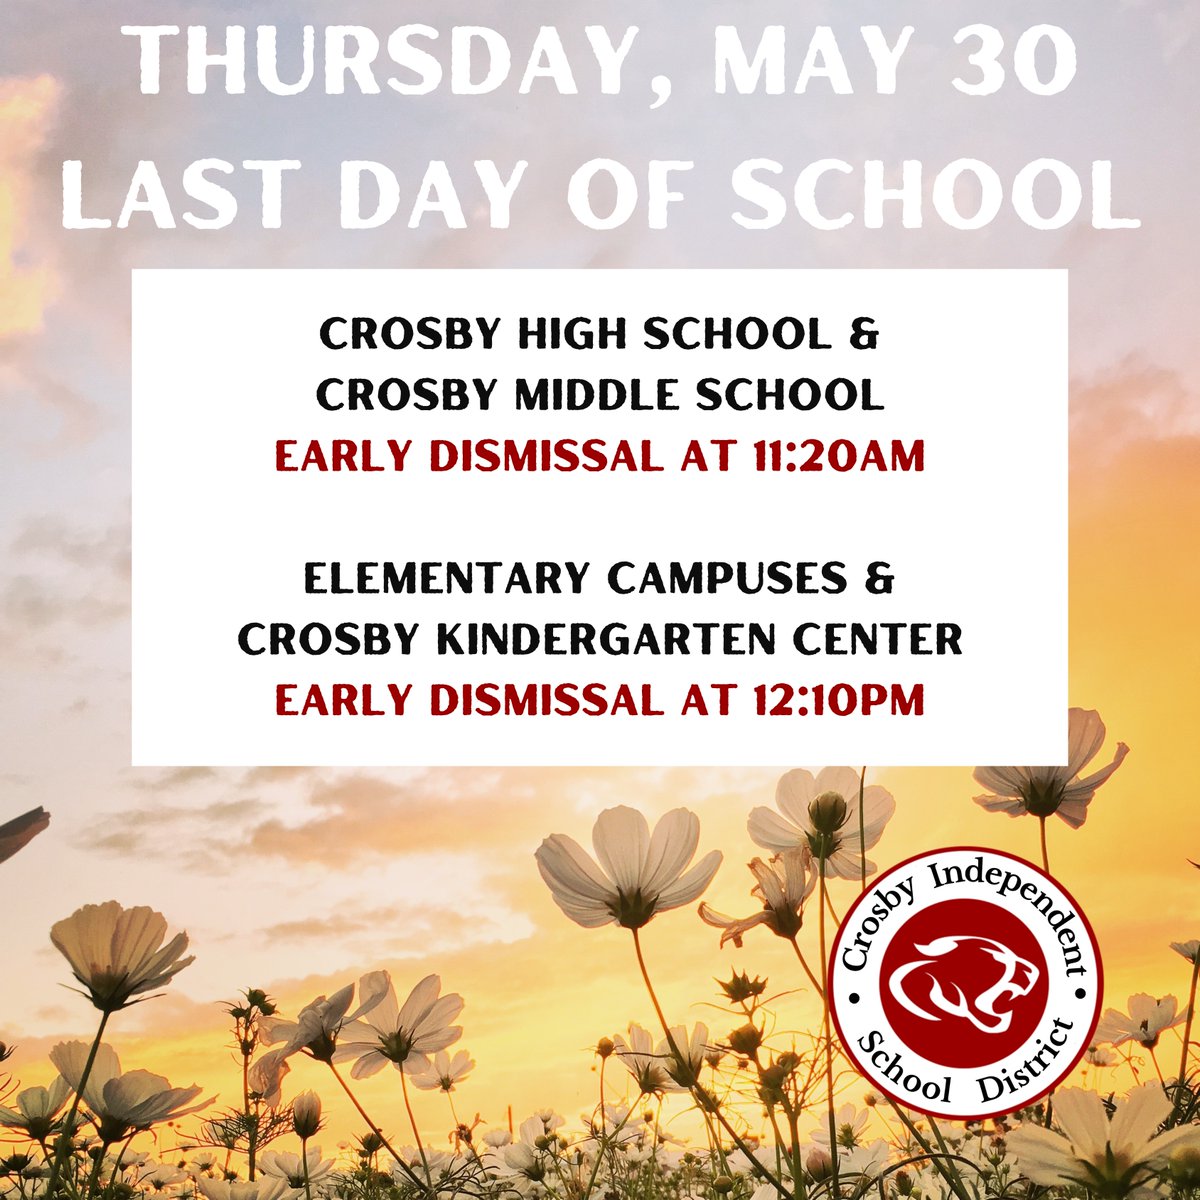 The last day of the 2023-24 school year will be Thursday, May 30. All campuses will release students early. CHS and CMS will dismiss at 11:20am. Elementary campuses and CKC will dismiss at 12:10pm. crosbyisd.org/calendar #MovingForward